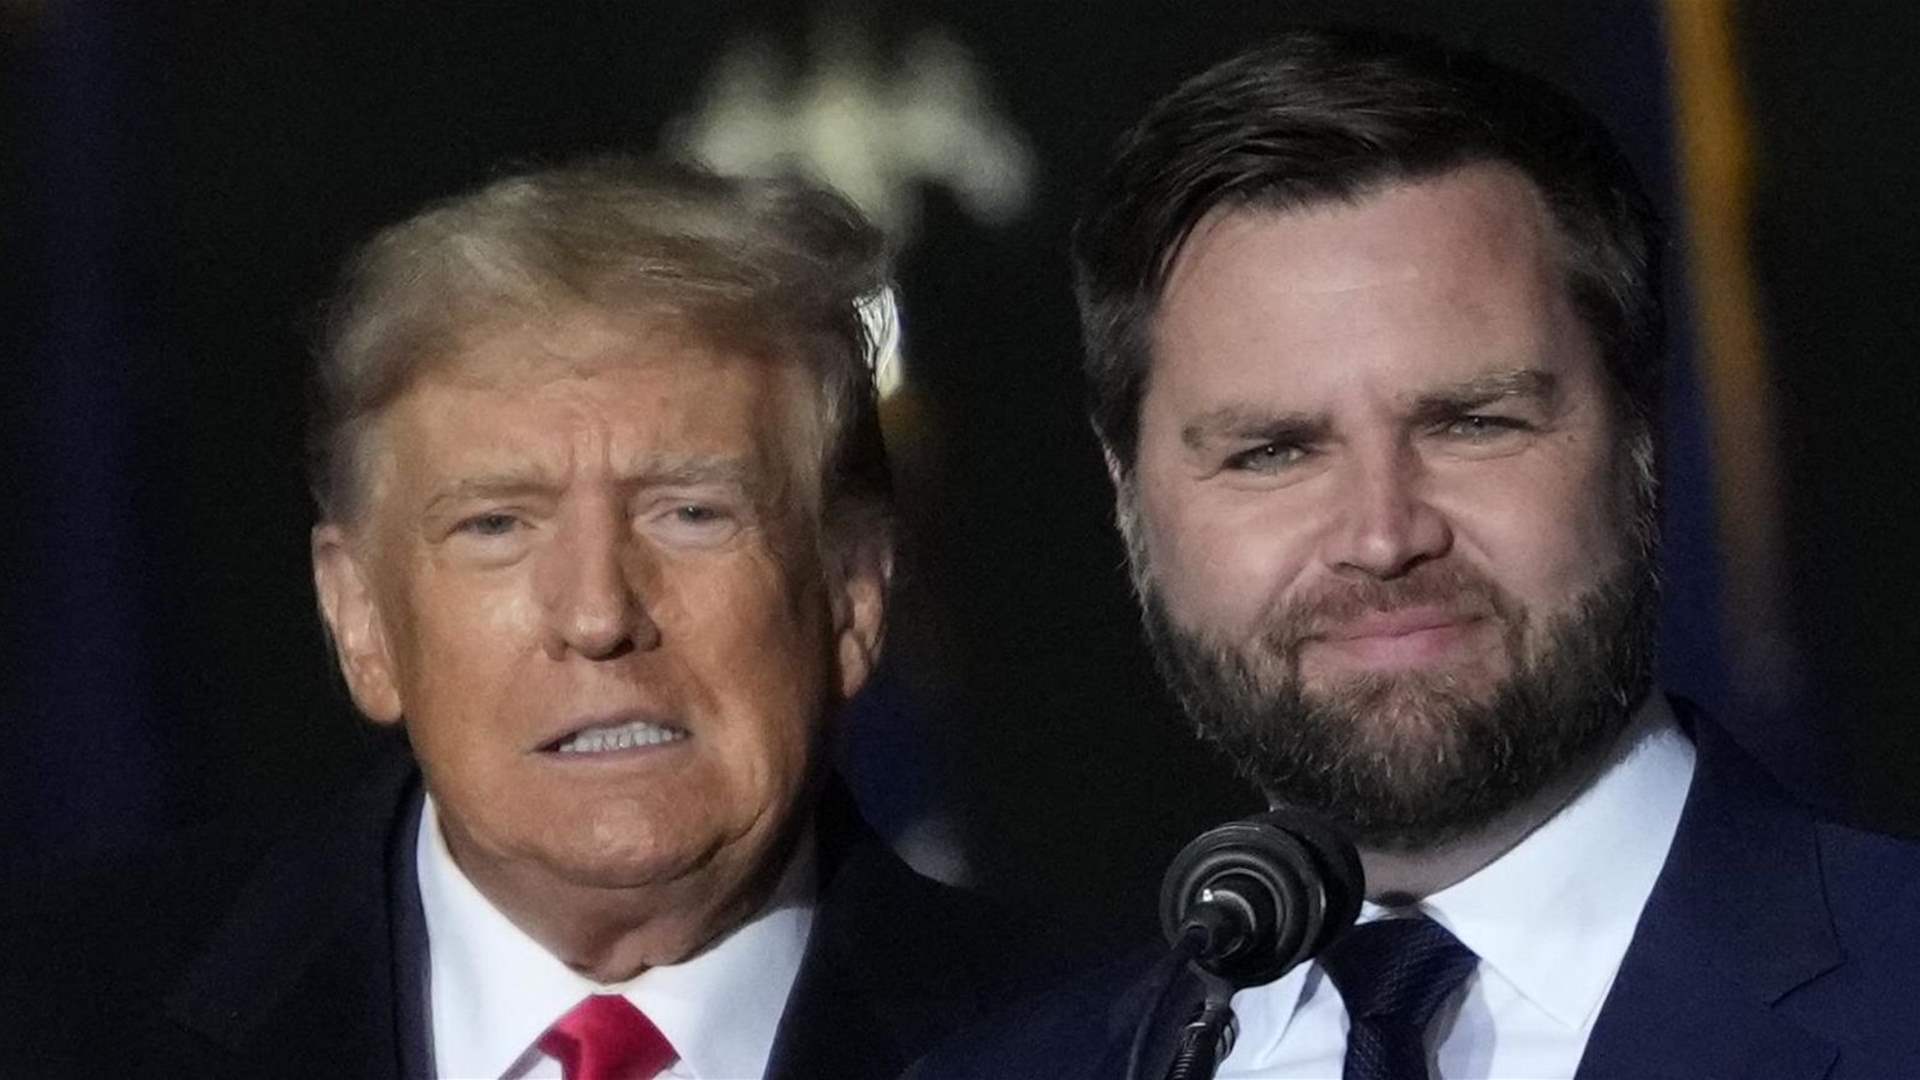 J.D. Vance: From Humble Beginnings to Trump’s Running Mate